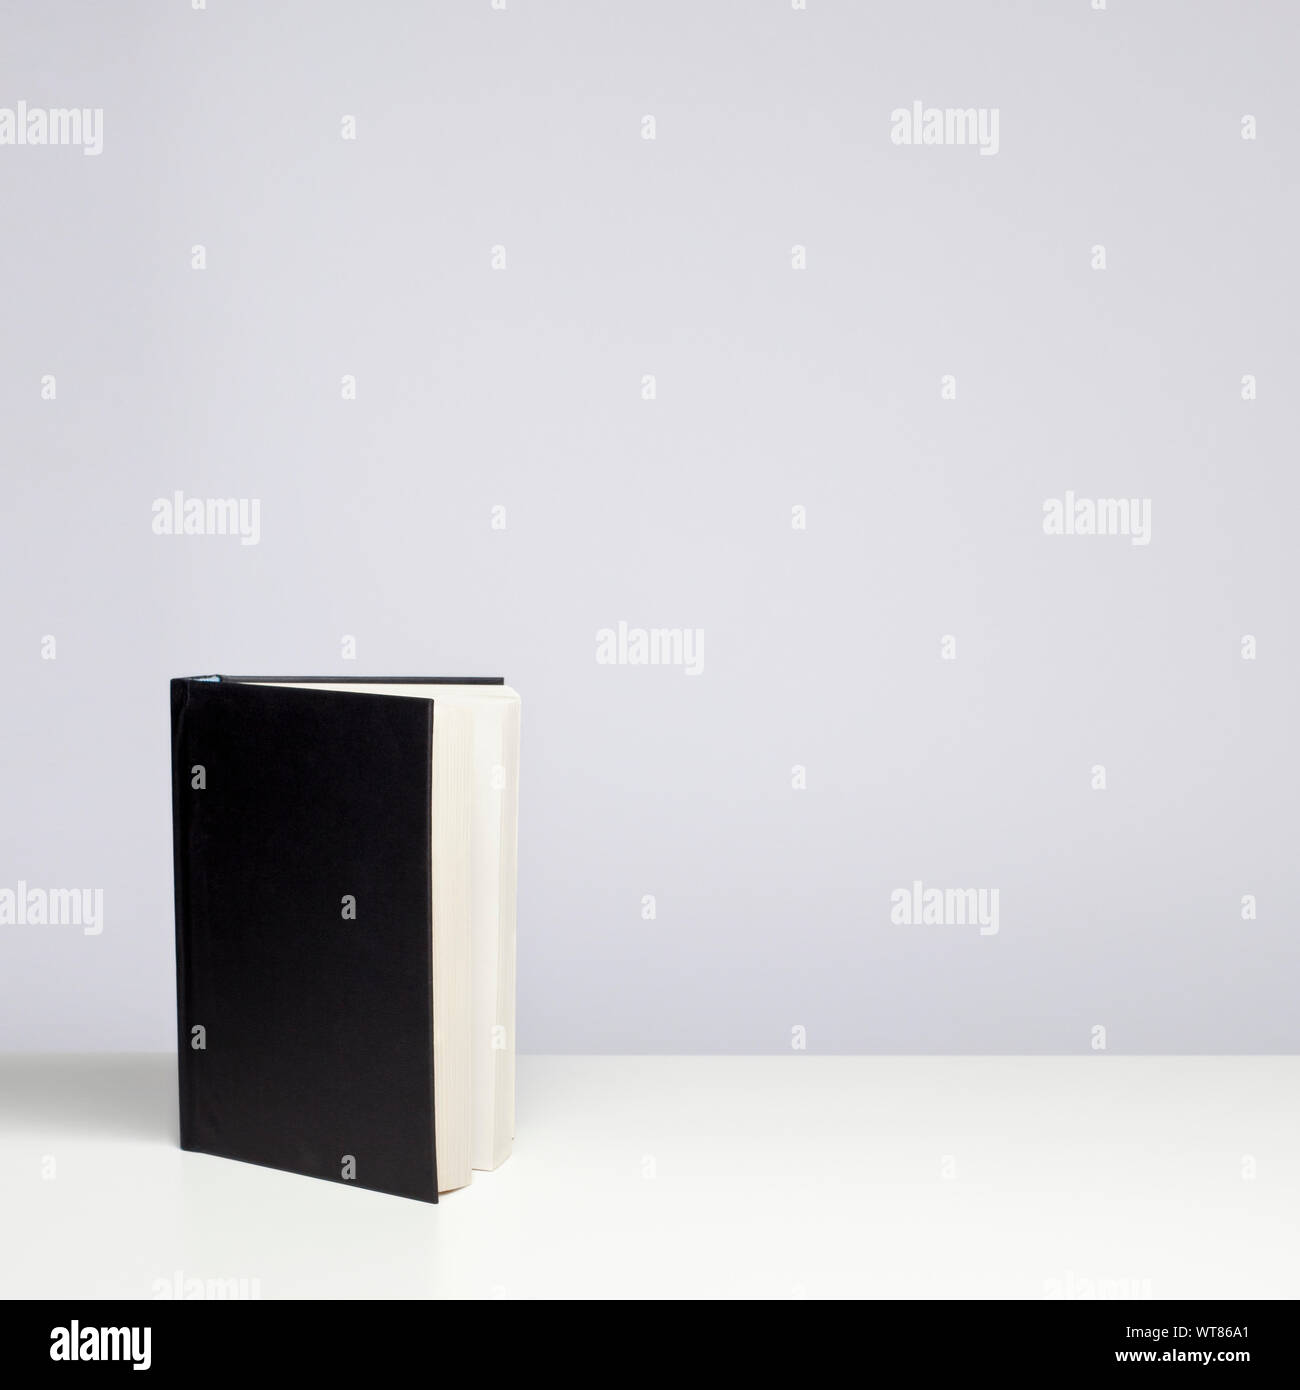 Hardback book with blank cover standing upright on a table Stock Photo